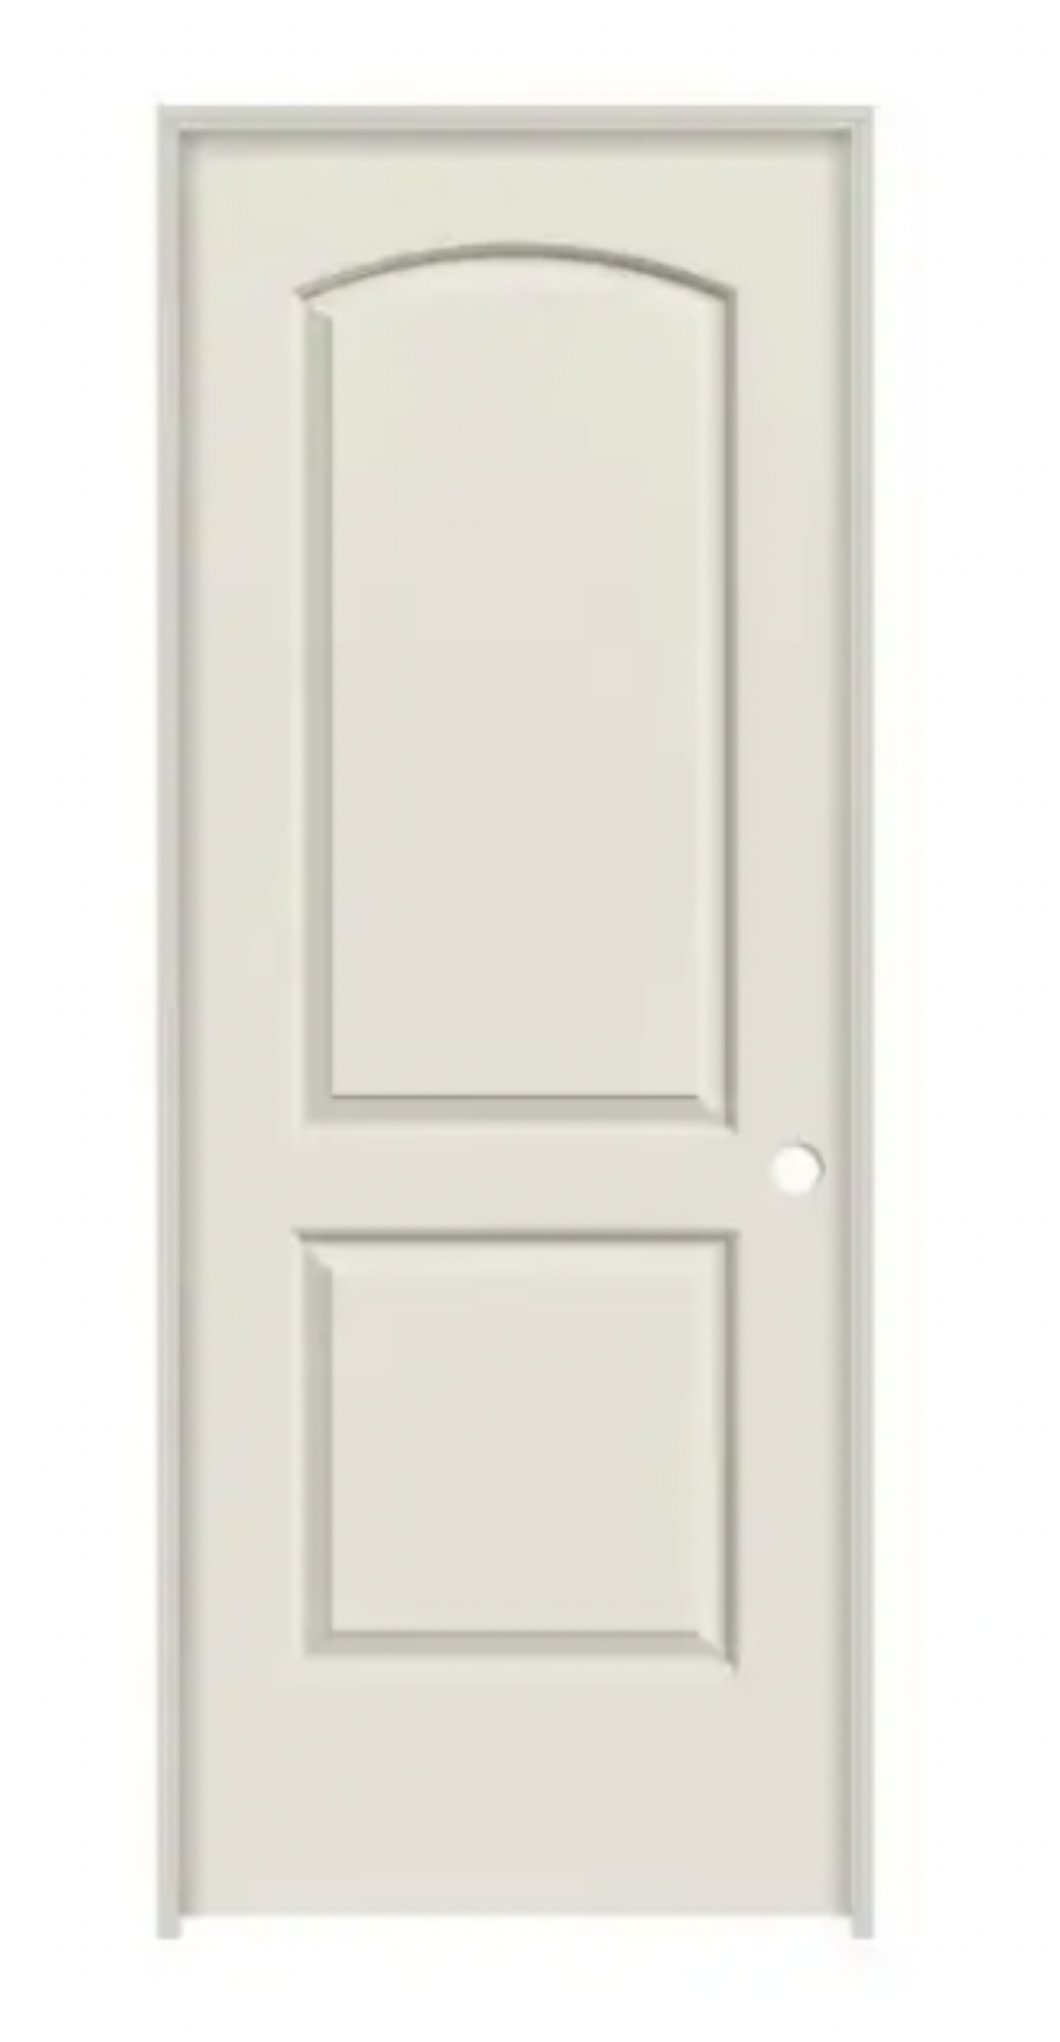 30 in. x 80 in. Continental Primed Left-Hand Smooth Molded Composite MDF Single Prehung Interior Door
by JELD-WEN